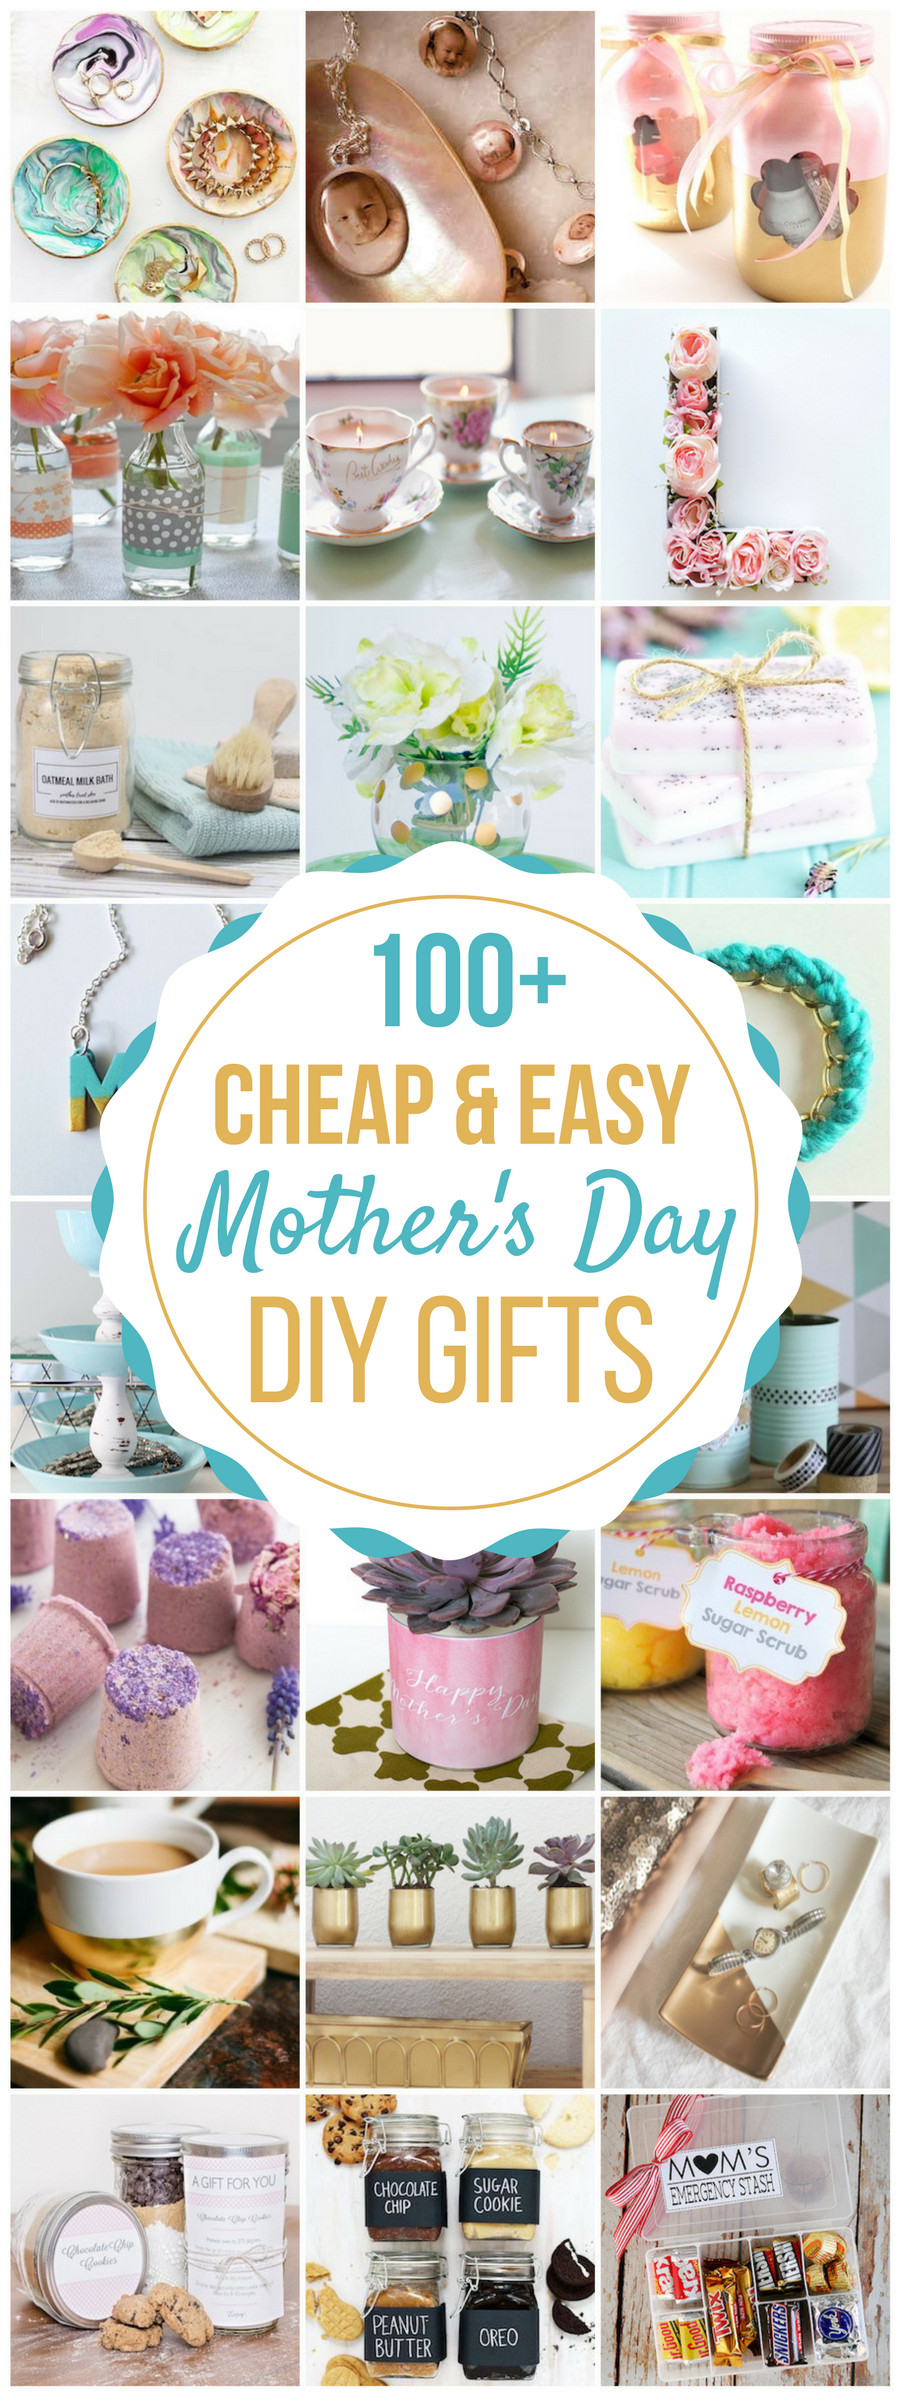 Mother's Day Ideas Diy
 100 Cheap & Easy DIY Mother s Day Gifts Prudent Penny